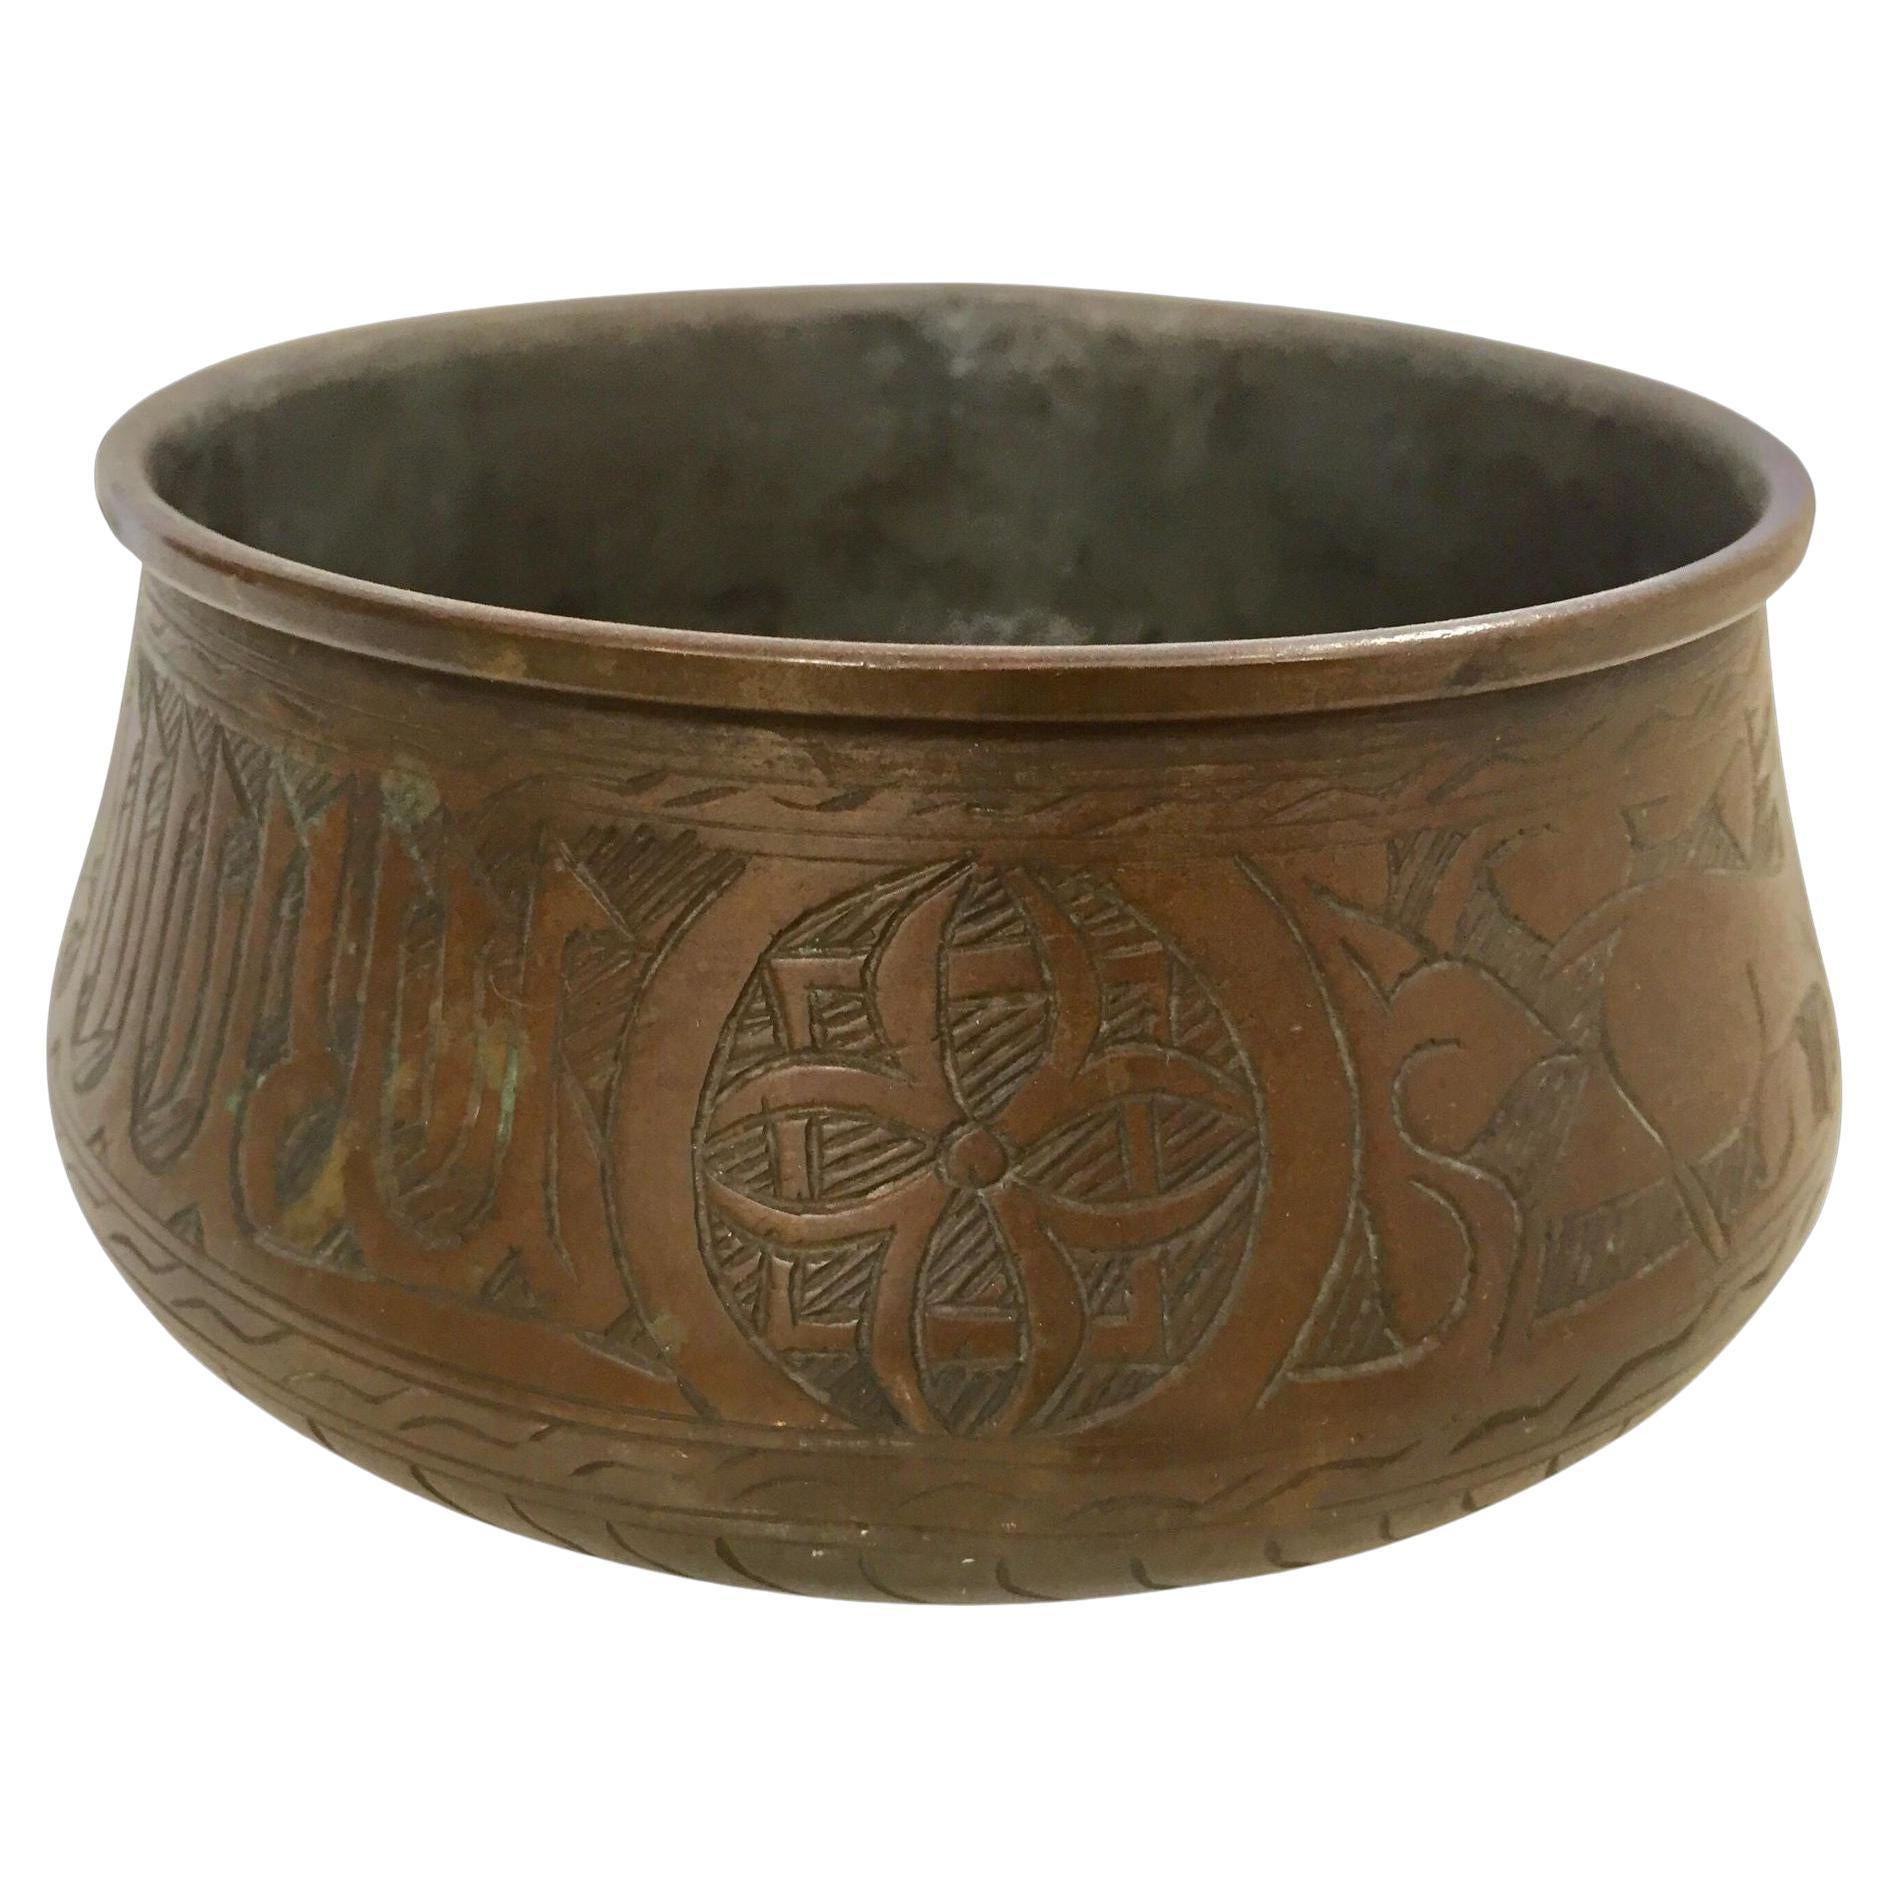 Middle Eastern Moorish Hand-Etched Copper Bowl with Islamic Writing